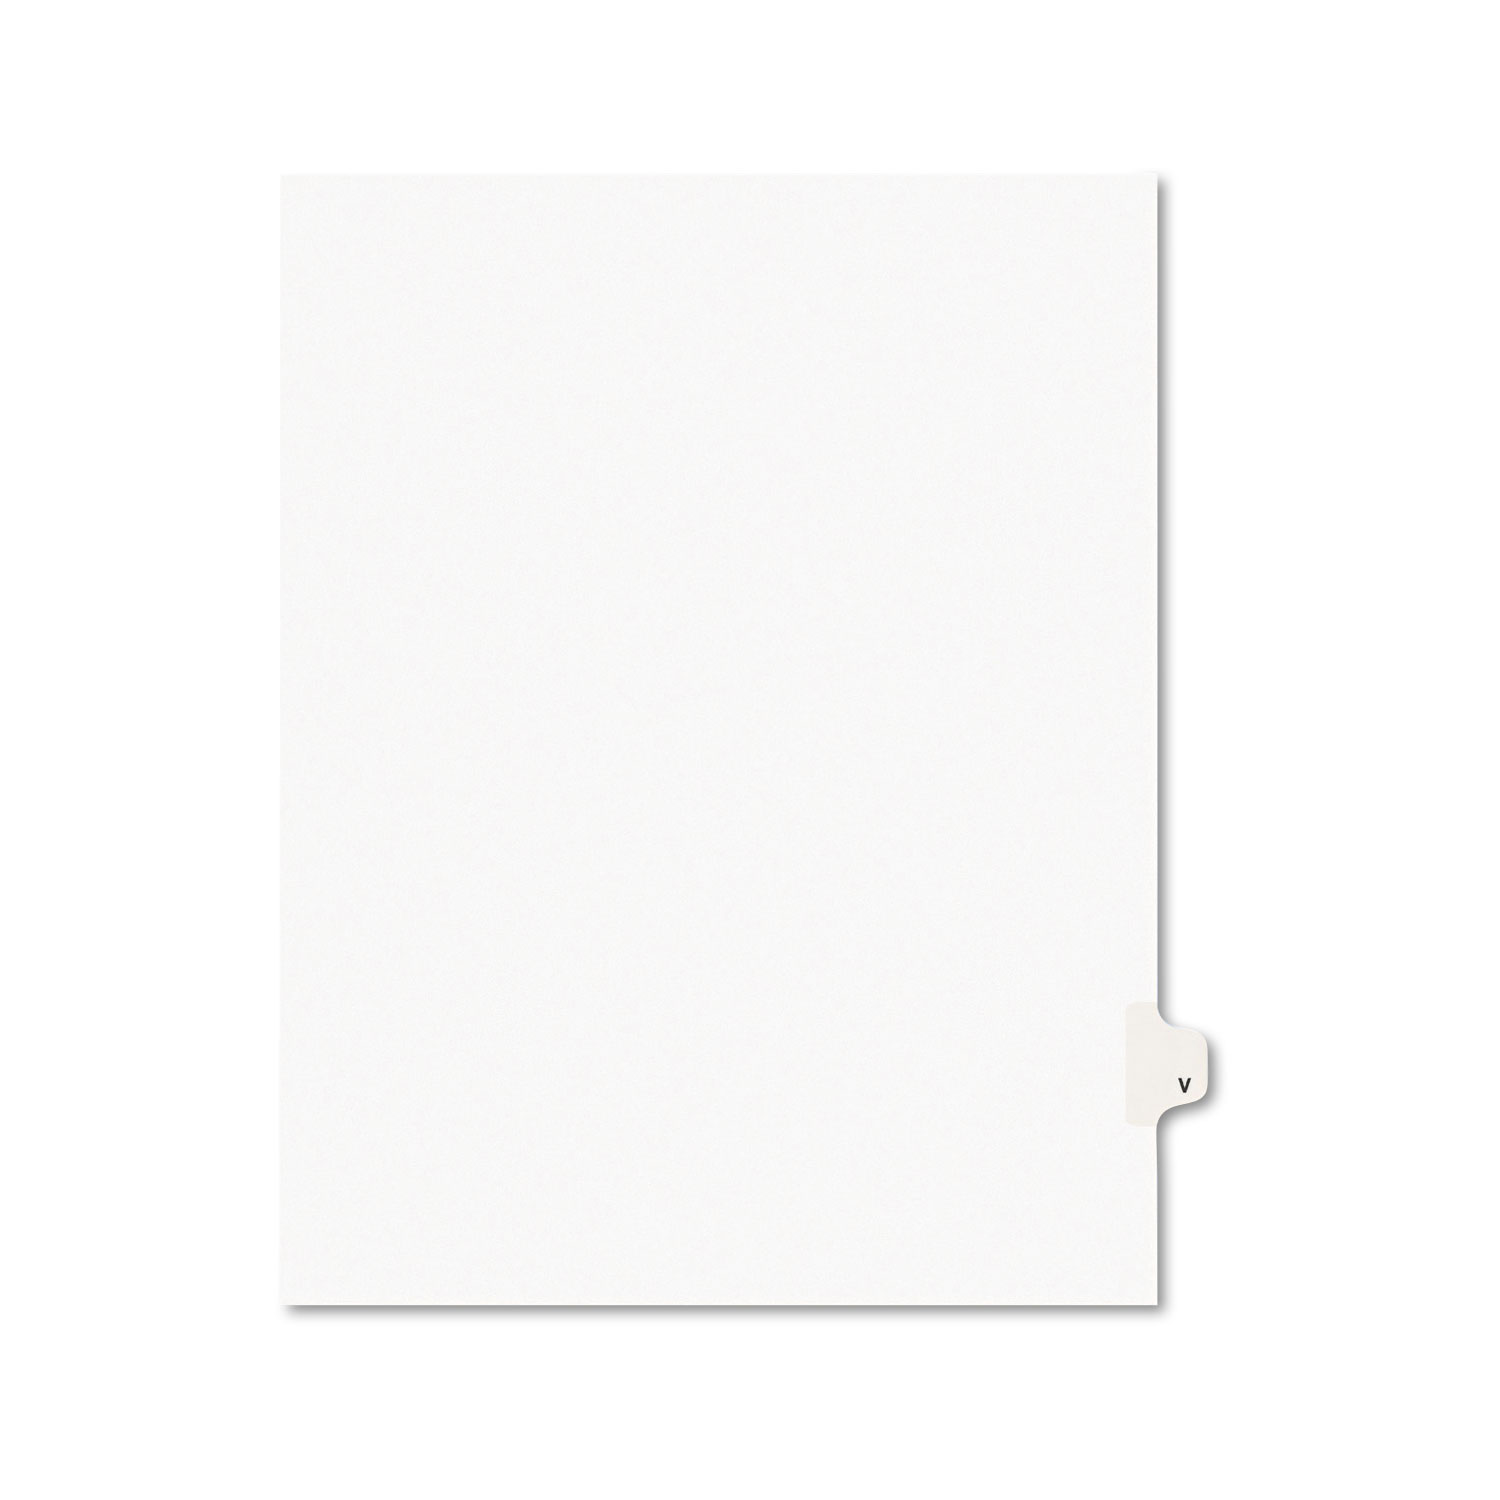  Avery 01422 Preprinted Legal Exhibit Side Tab Index Dividers, Avery Style, 26-Tab, V, 11 x 8.5, White, 25/Pack (AVE01422) 